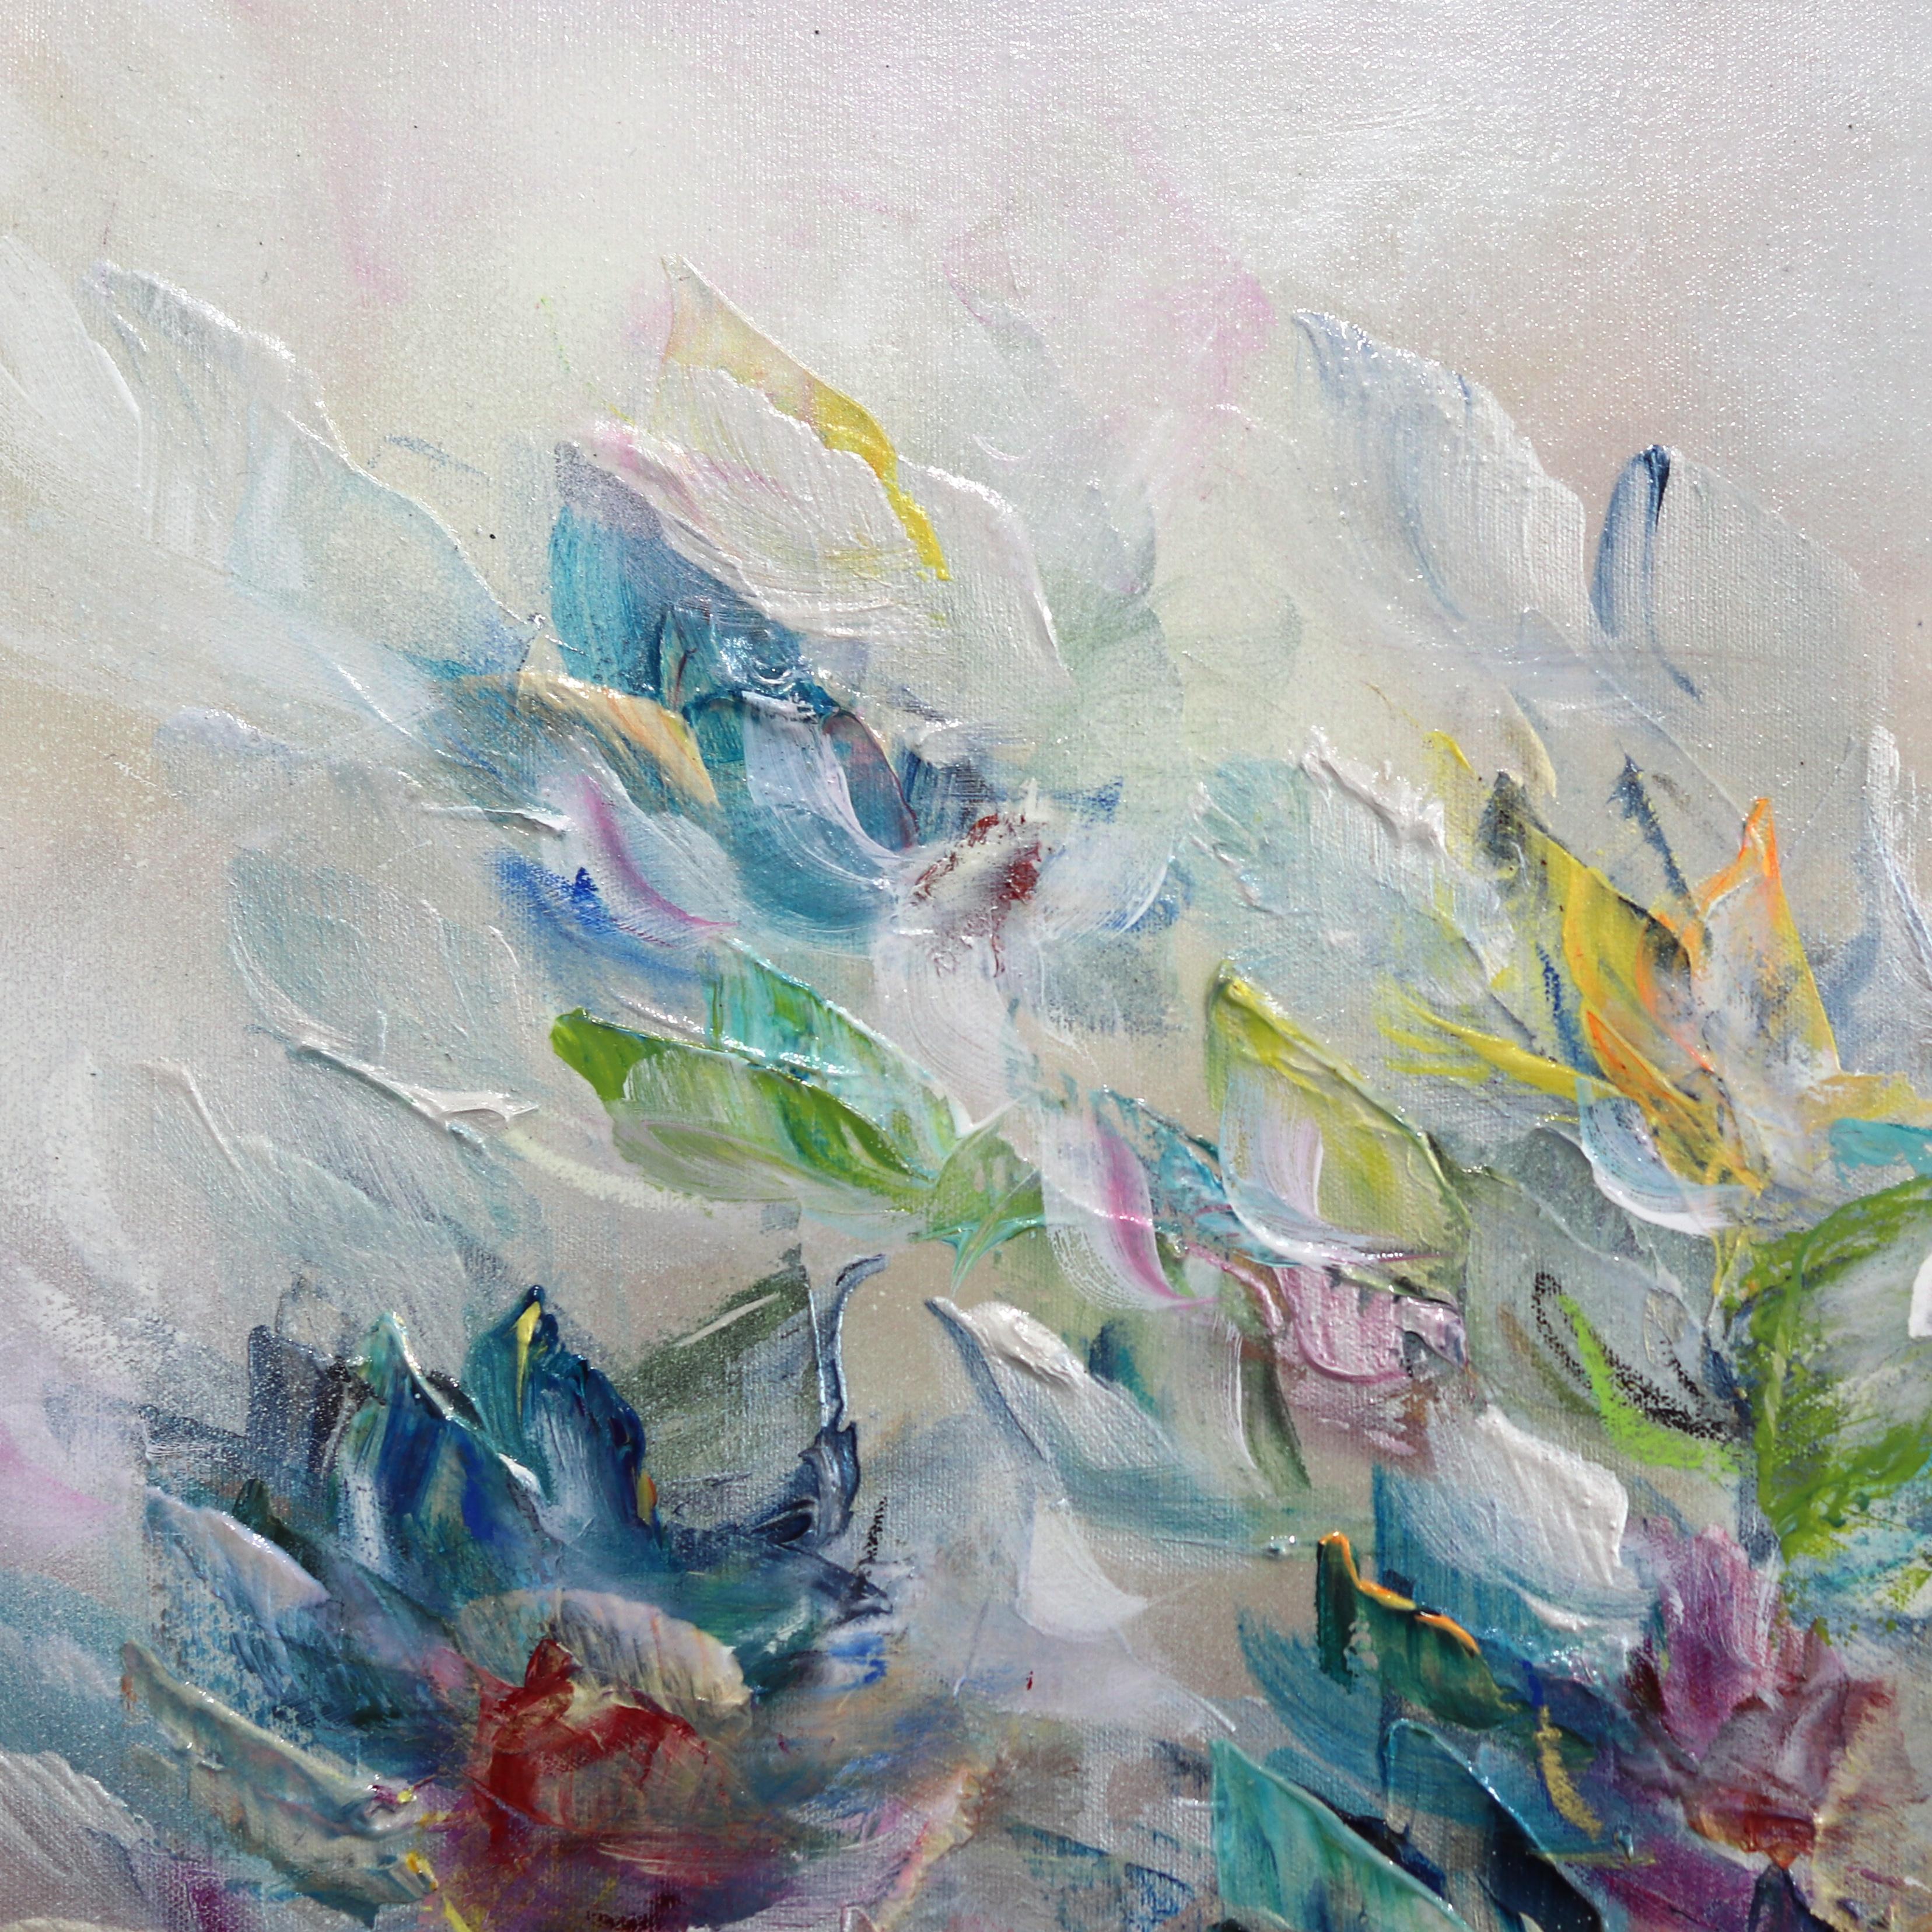 Tales of Flying and Adventures - Soft Abstract Floral Landscape Painting For Sale 3